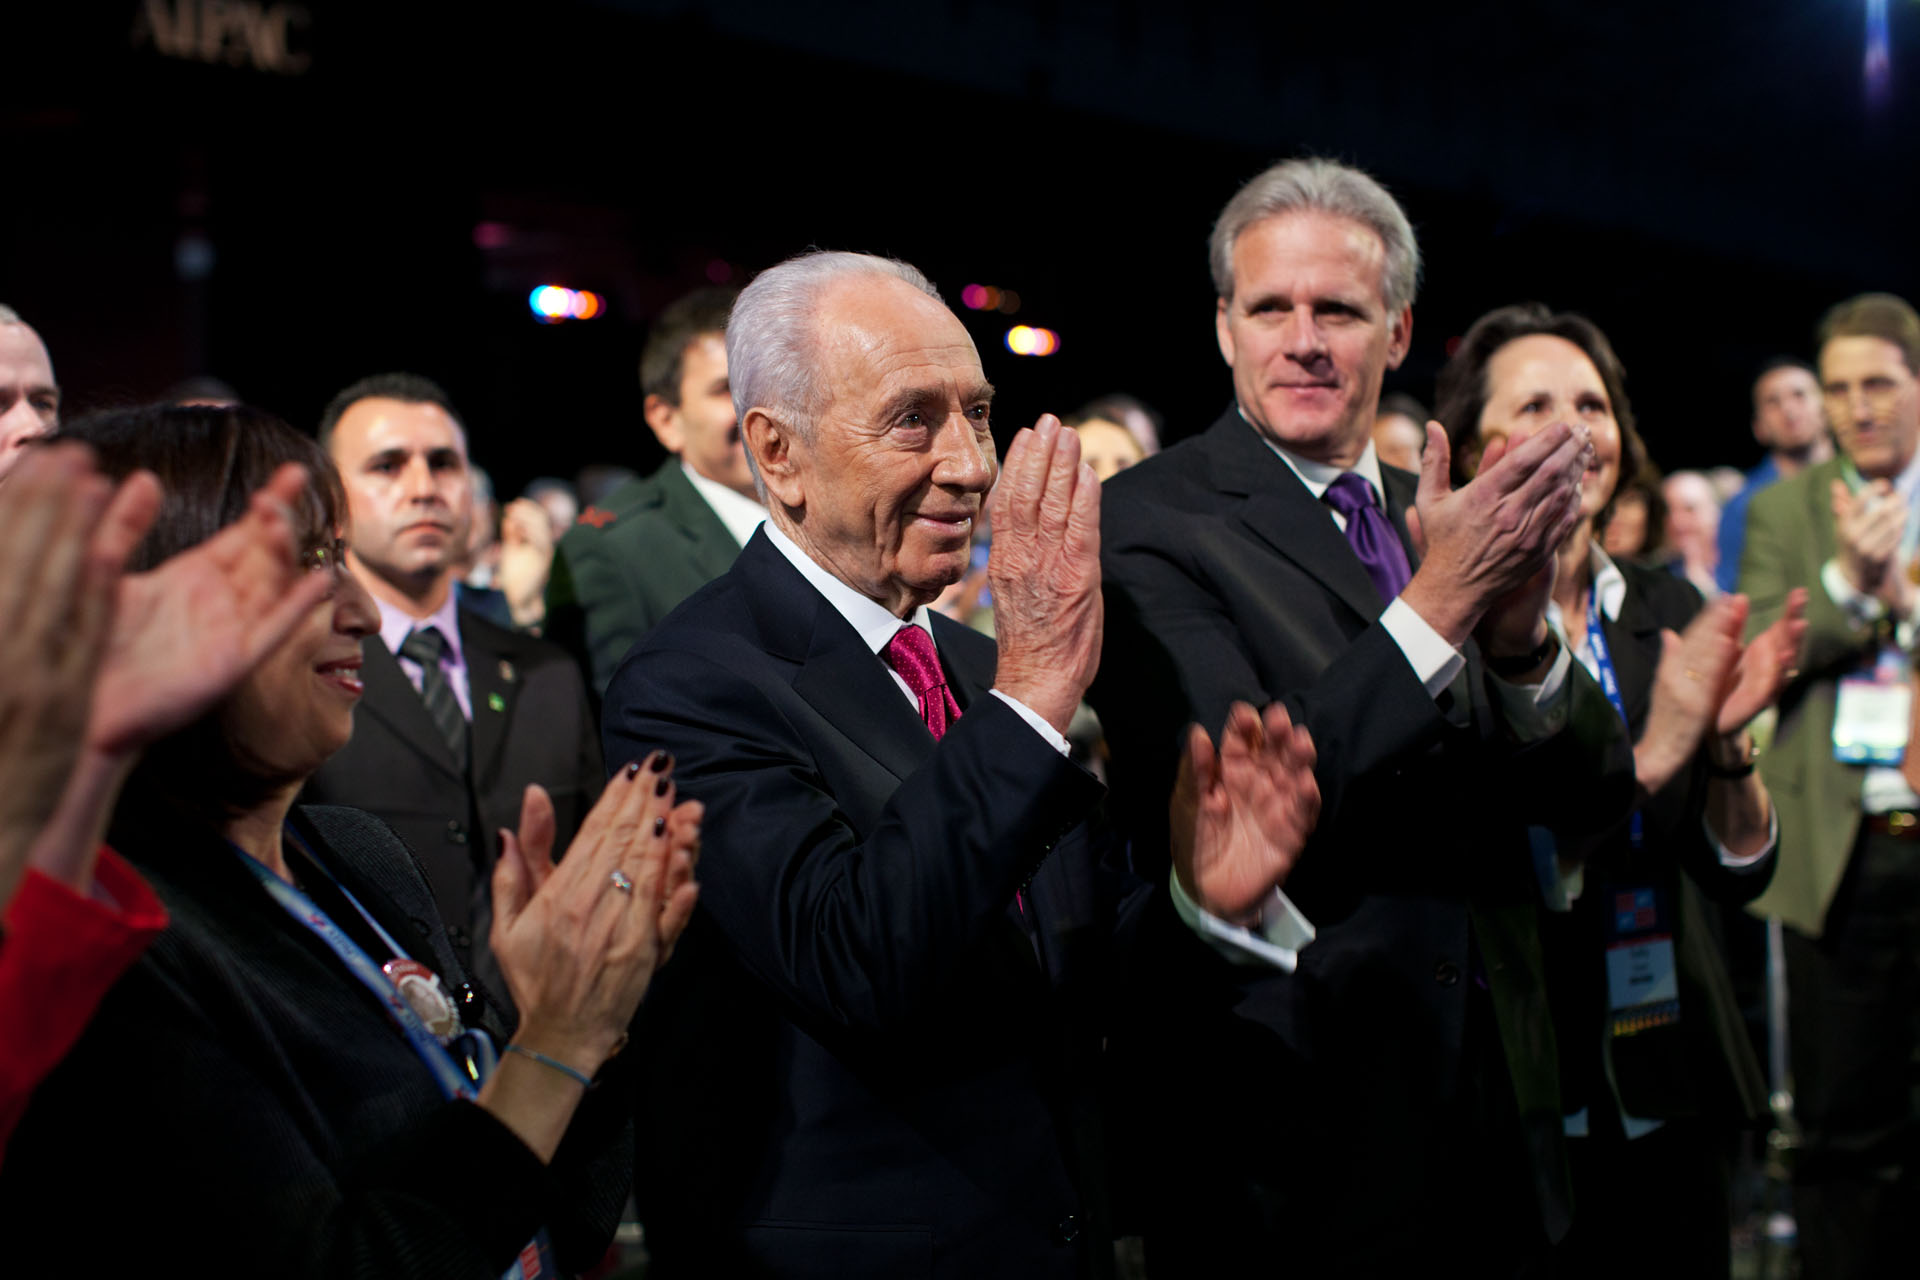 President of Israel Shimon Peres acknowledges recognition from President Barack Obama